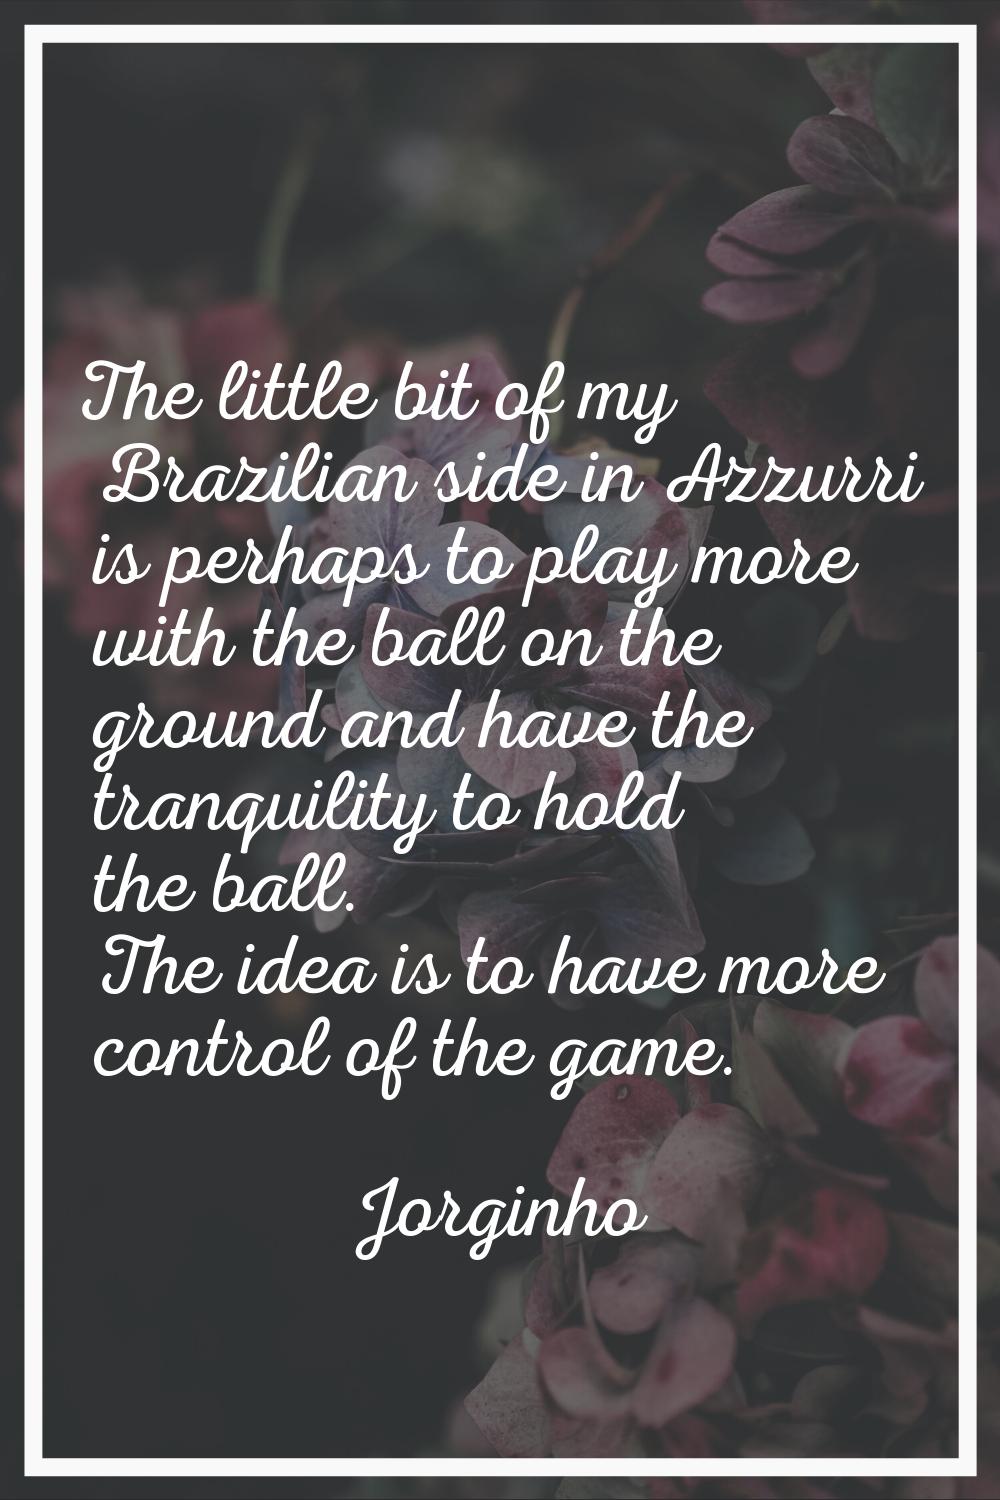 The little bit of my Brazilian side in Azzurri is perhaps to play more with the ball on the ground 